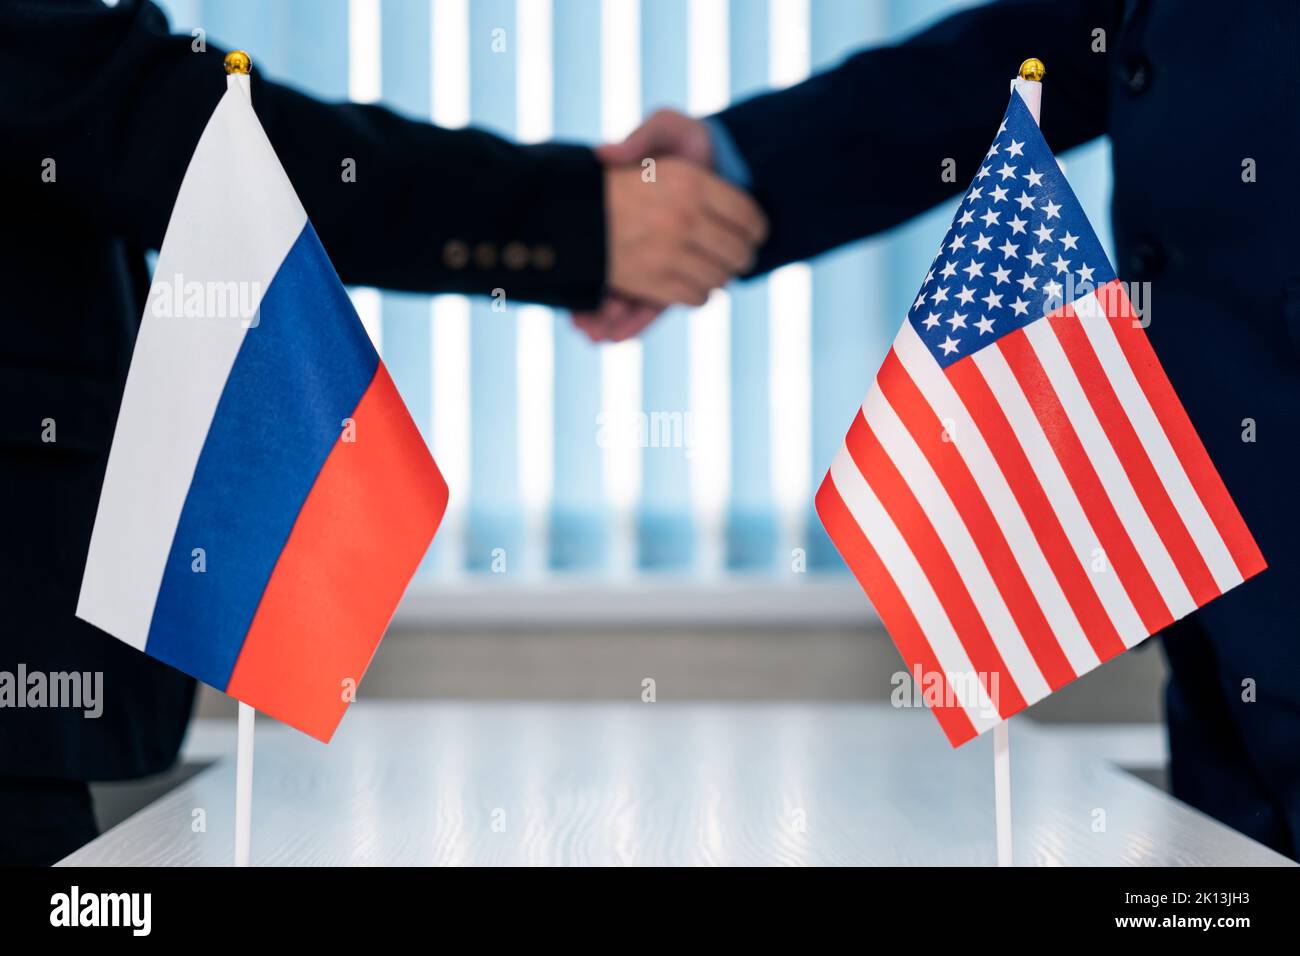 Close-up Of Two Businesspeople Shaking Hands In Front Of Us Russia Flags On Table Stock Photo